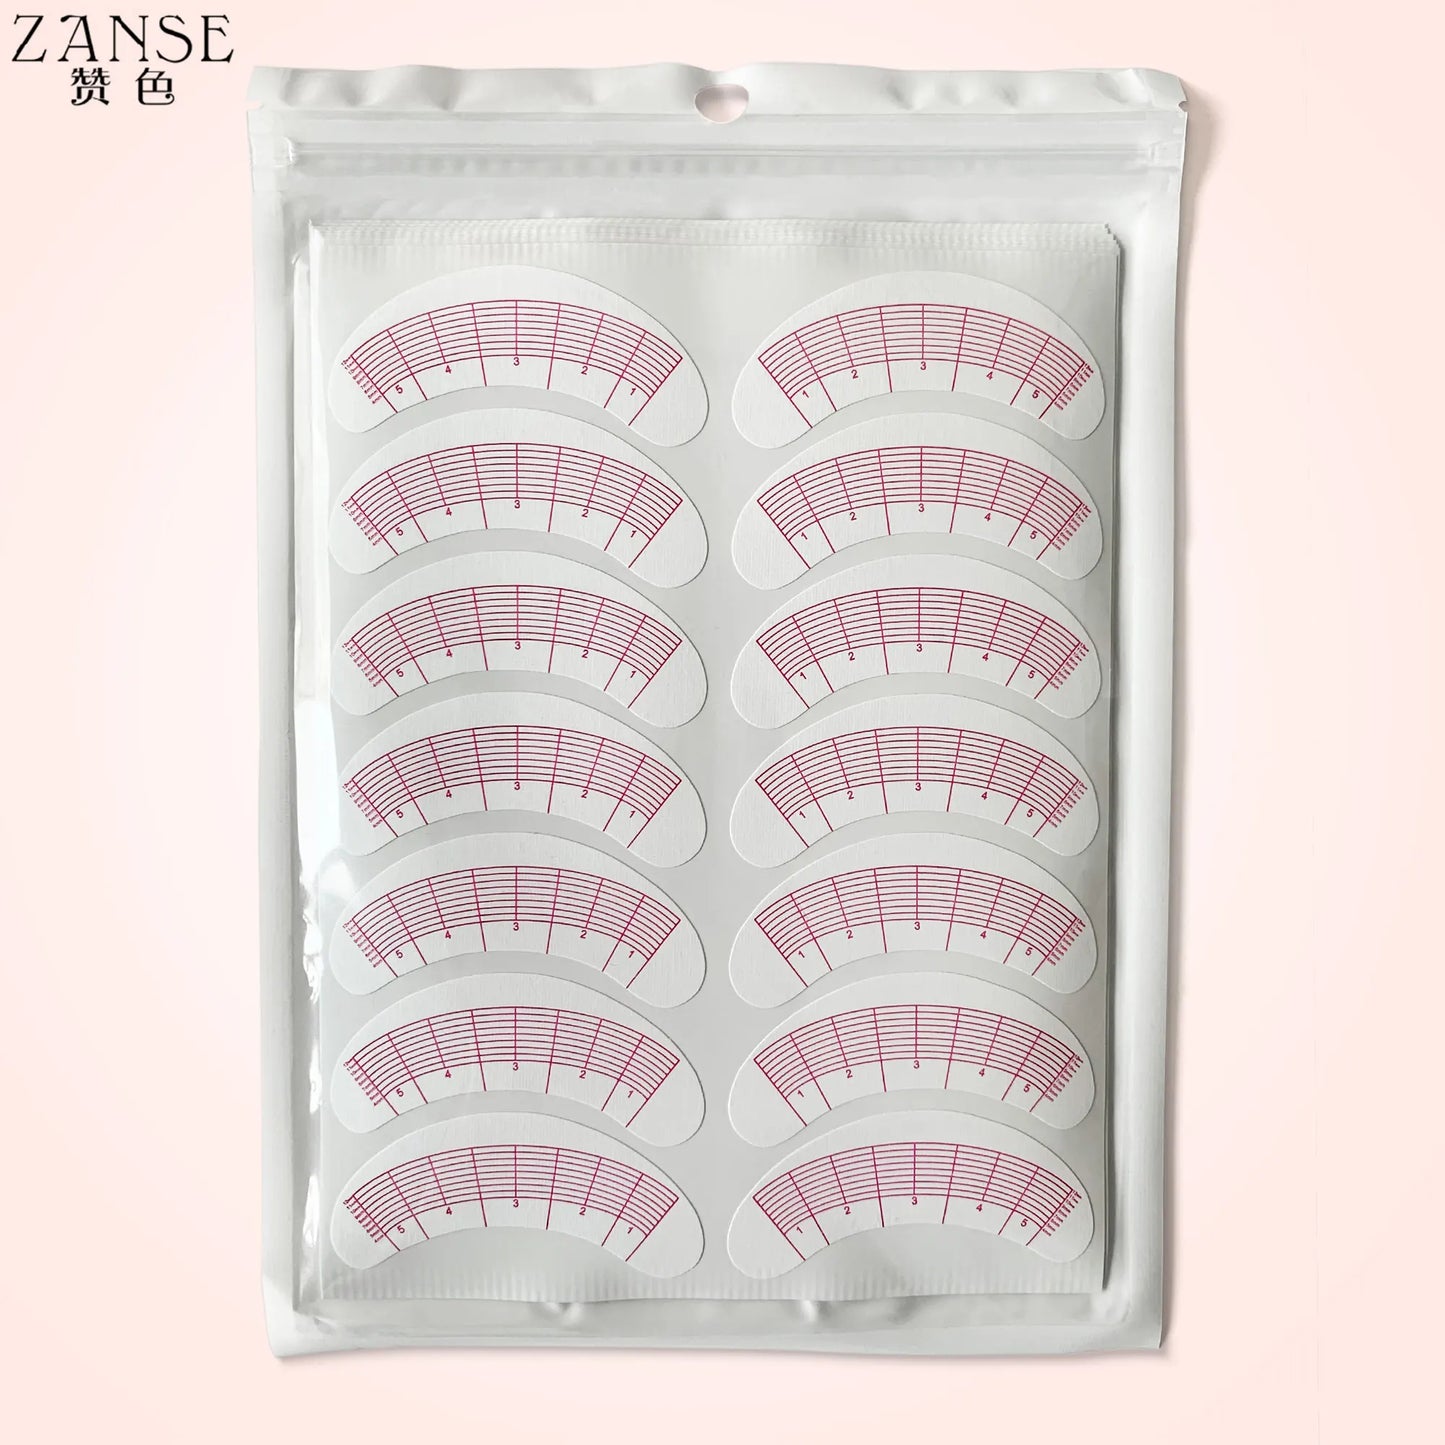 70 Pairs Lash Mapping Stickers Under Eye Positioning Tips Sticker for Eyelashes Extension Practice Eye Pads Paper Patches